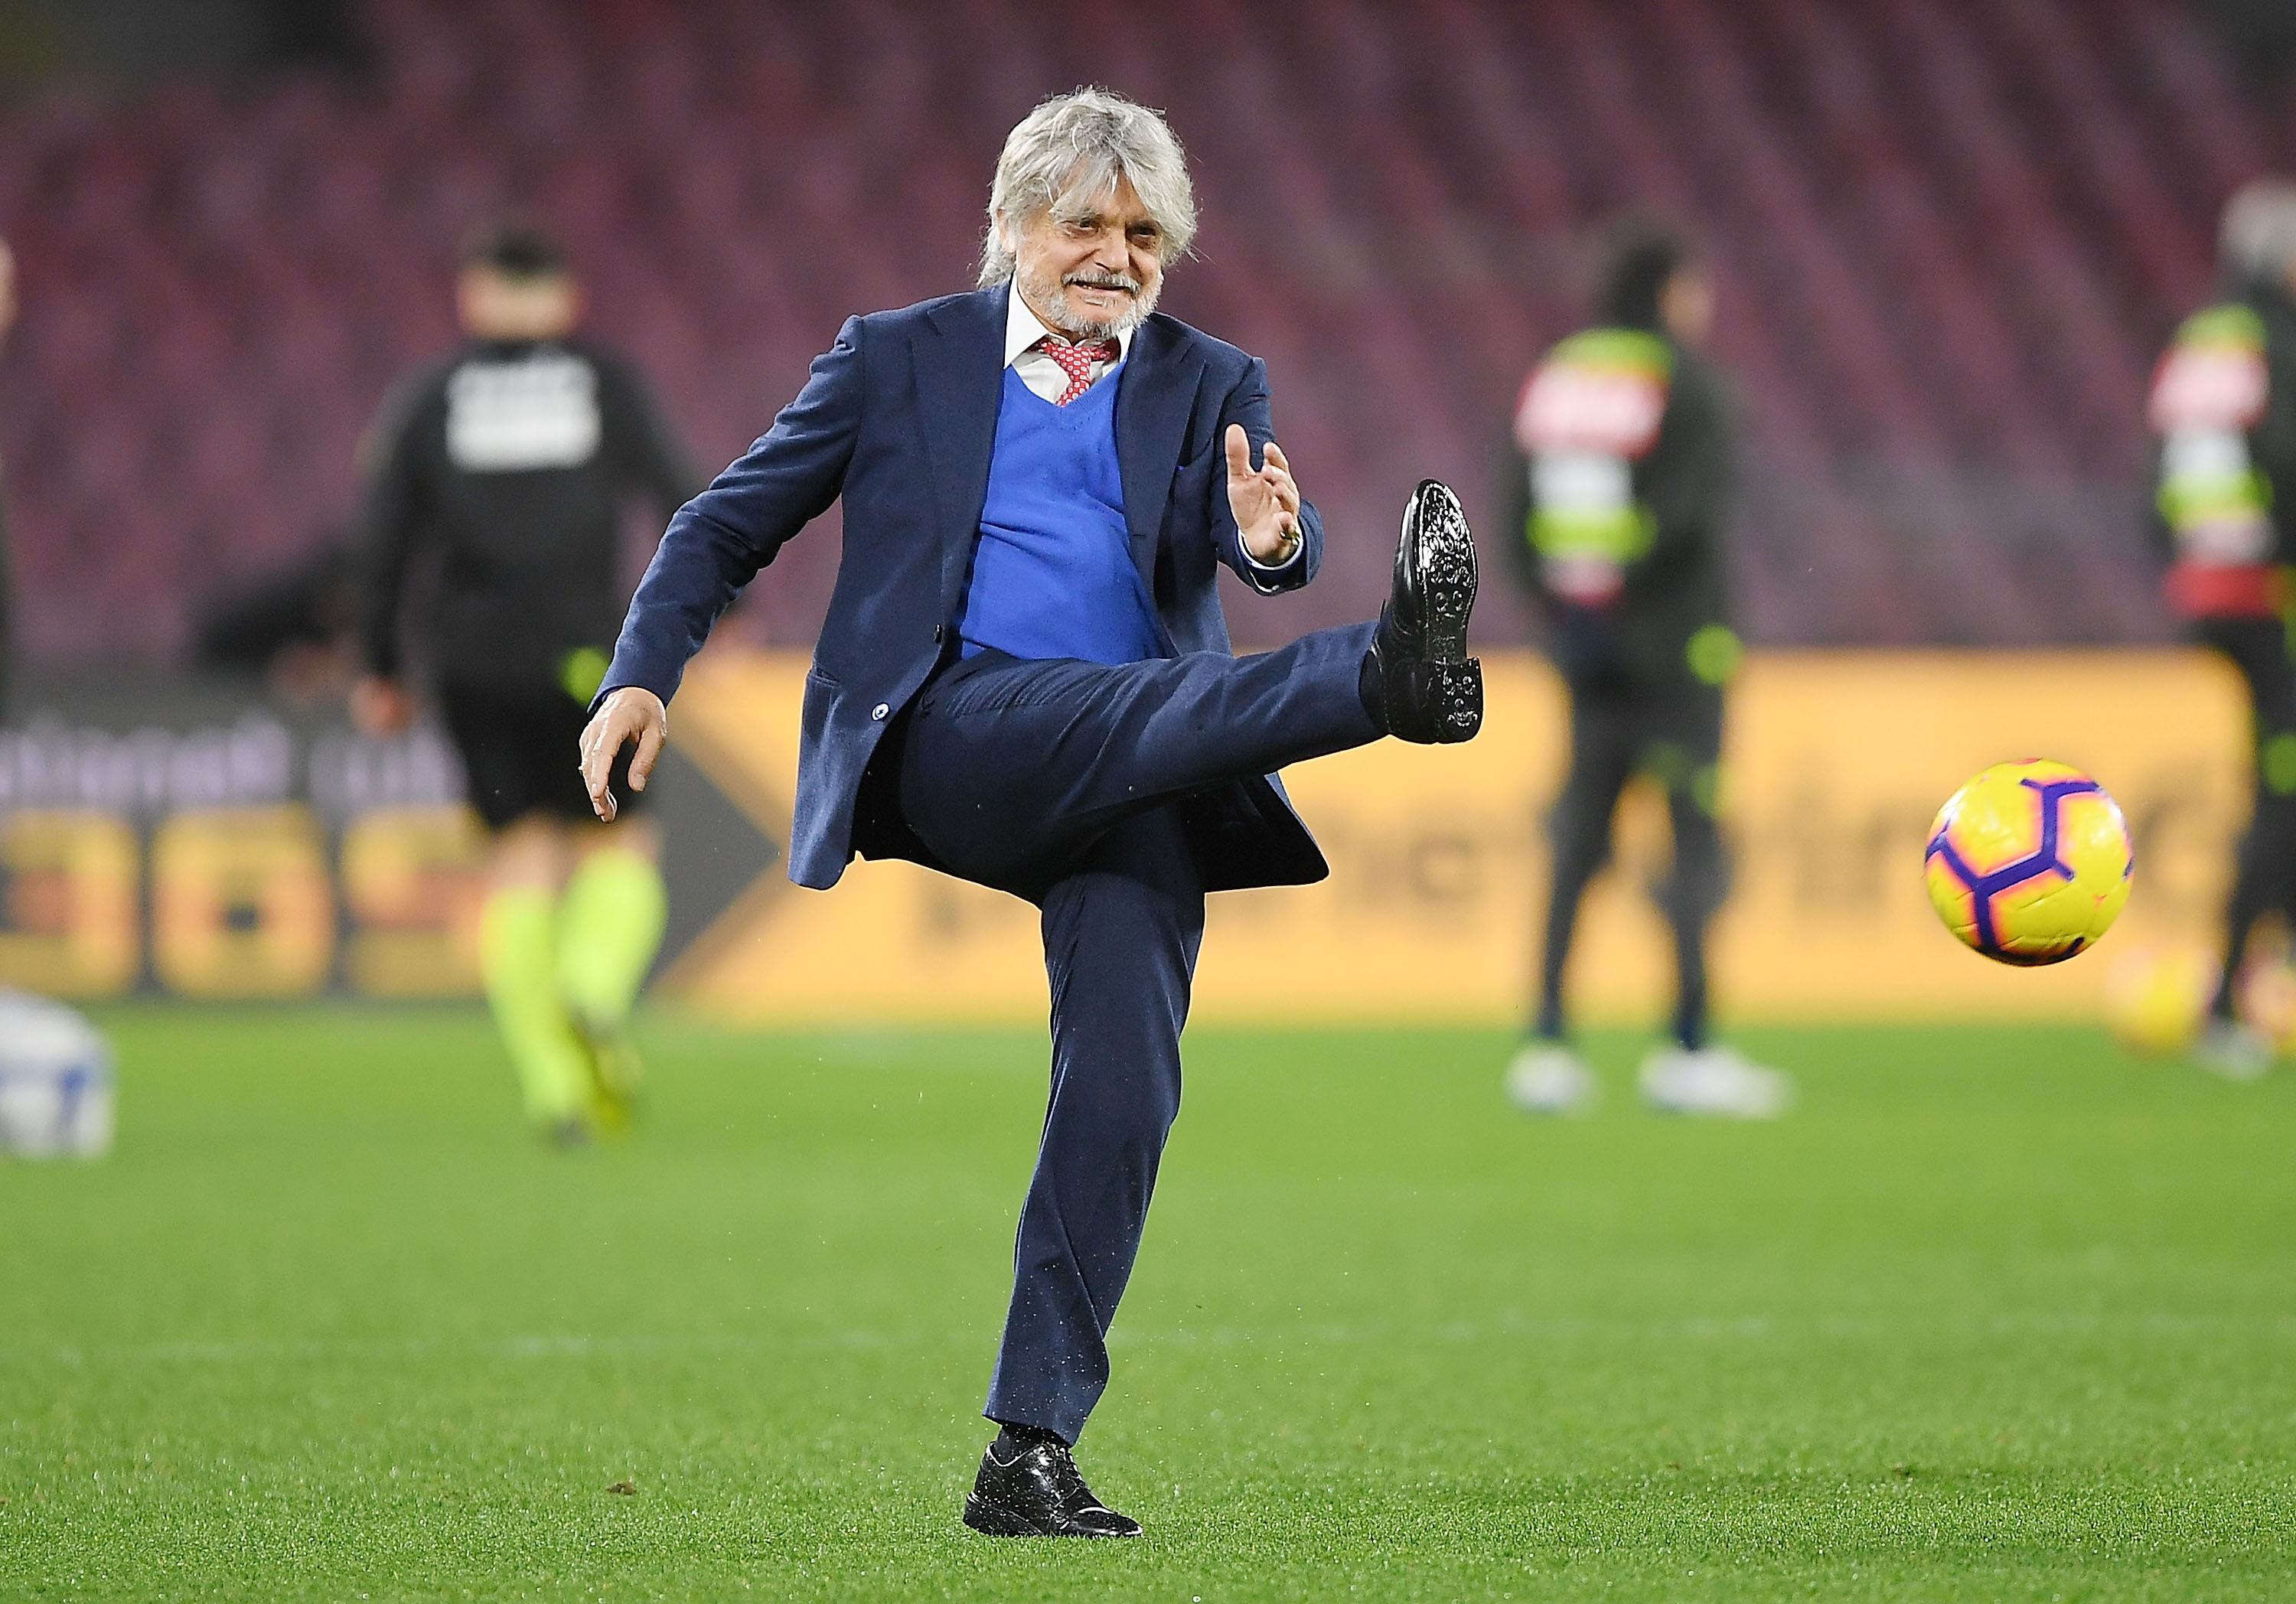 NAPLES, ITALY - FEBRUARY 02:  Massimo Ferrero, President of UC Sampdoria in the pitch playing with the ball before the Serie A match between SSC Napoli and UC Sampdoria at Stadio San Paolo on February 2, 2019 in Naples, Italy.  (Photo by Francesco Pecoraro/Getty Images)